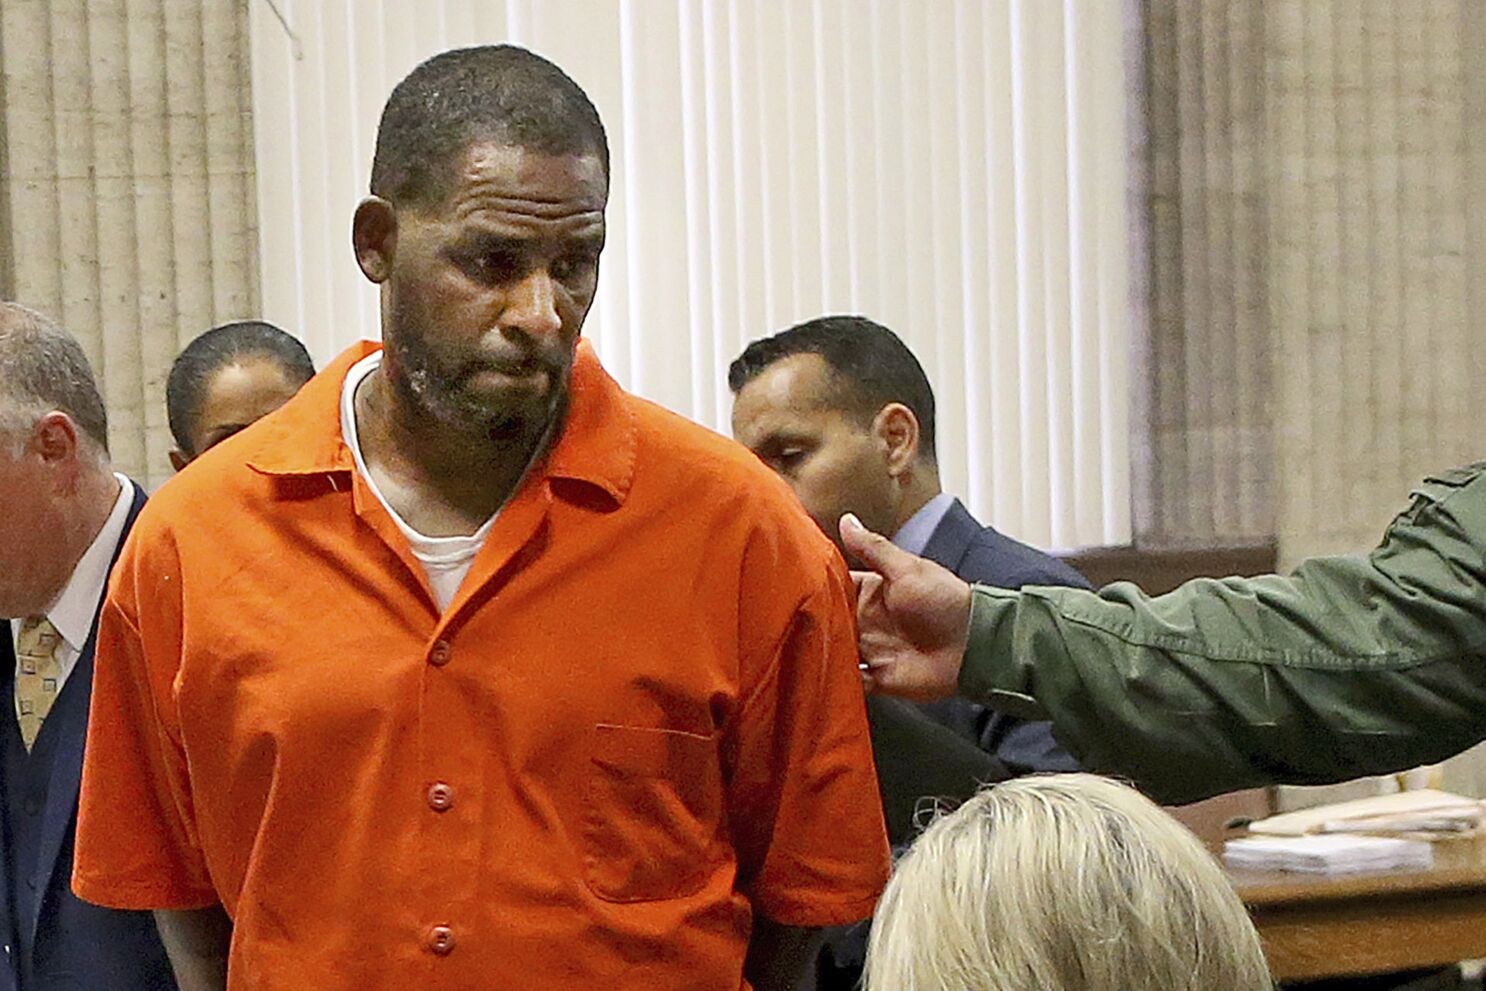 R. Kelly’s appeal of sex trafficking conviction faces doubts in court